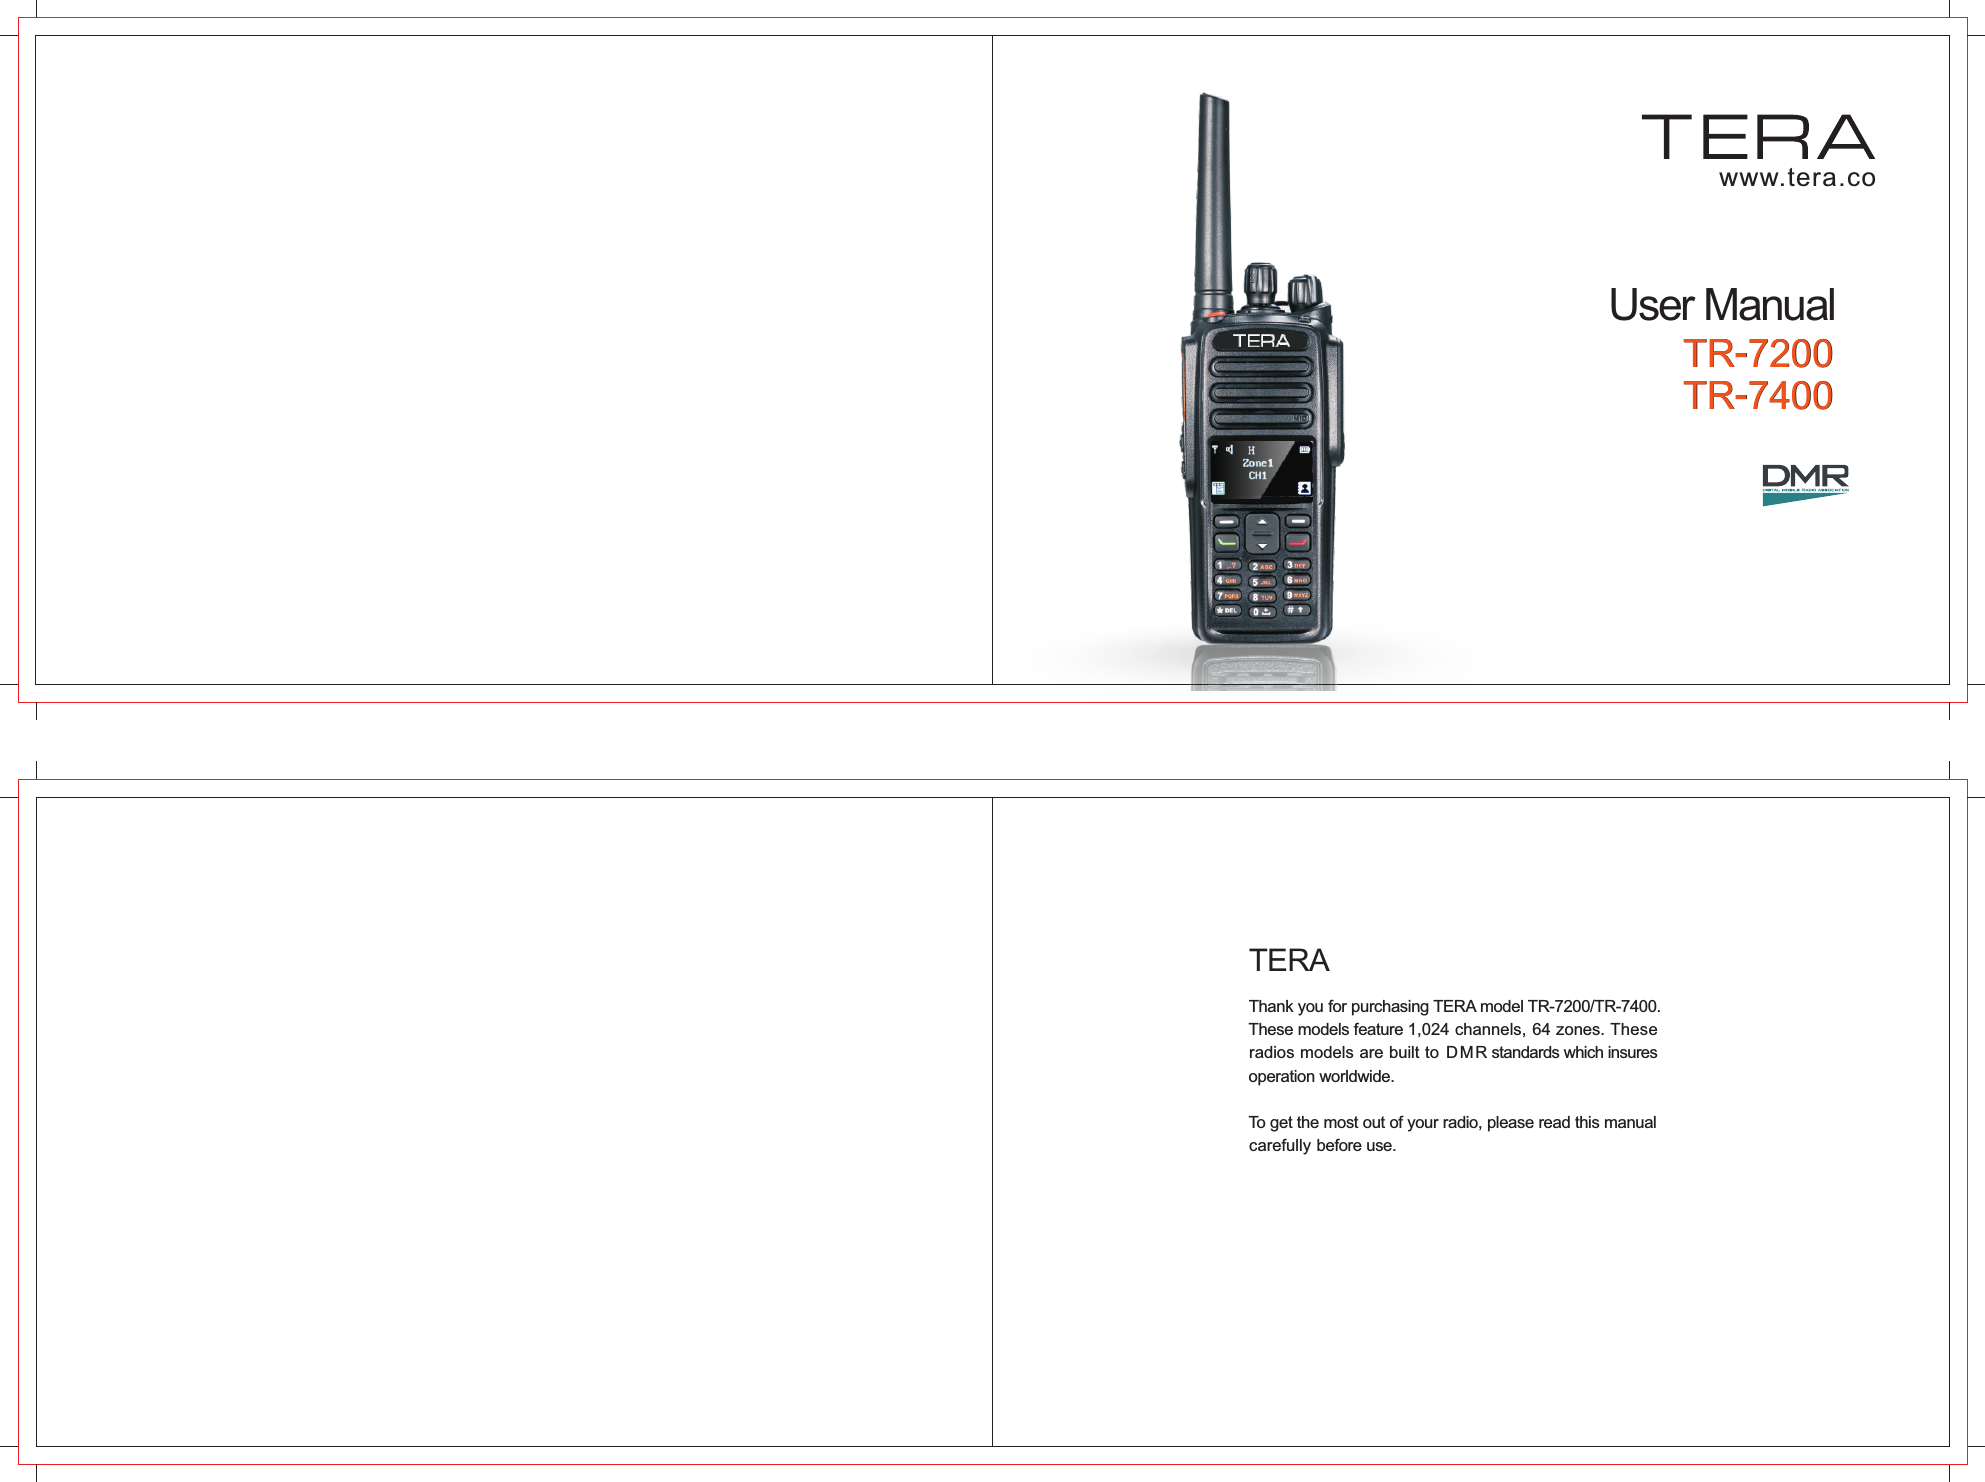 Thank you for purchasing TERA model TR-7200/TR-7400.These models feature 1,024 channels, 64 zones. These radios models are built to DMR standards which insures operation worldwide.To get the most out of your radio, please read this manual carefully before use.TERATR-7200TR-7400www.tera.coUser ManualTR-7200TR-7400